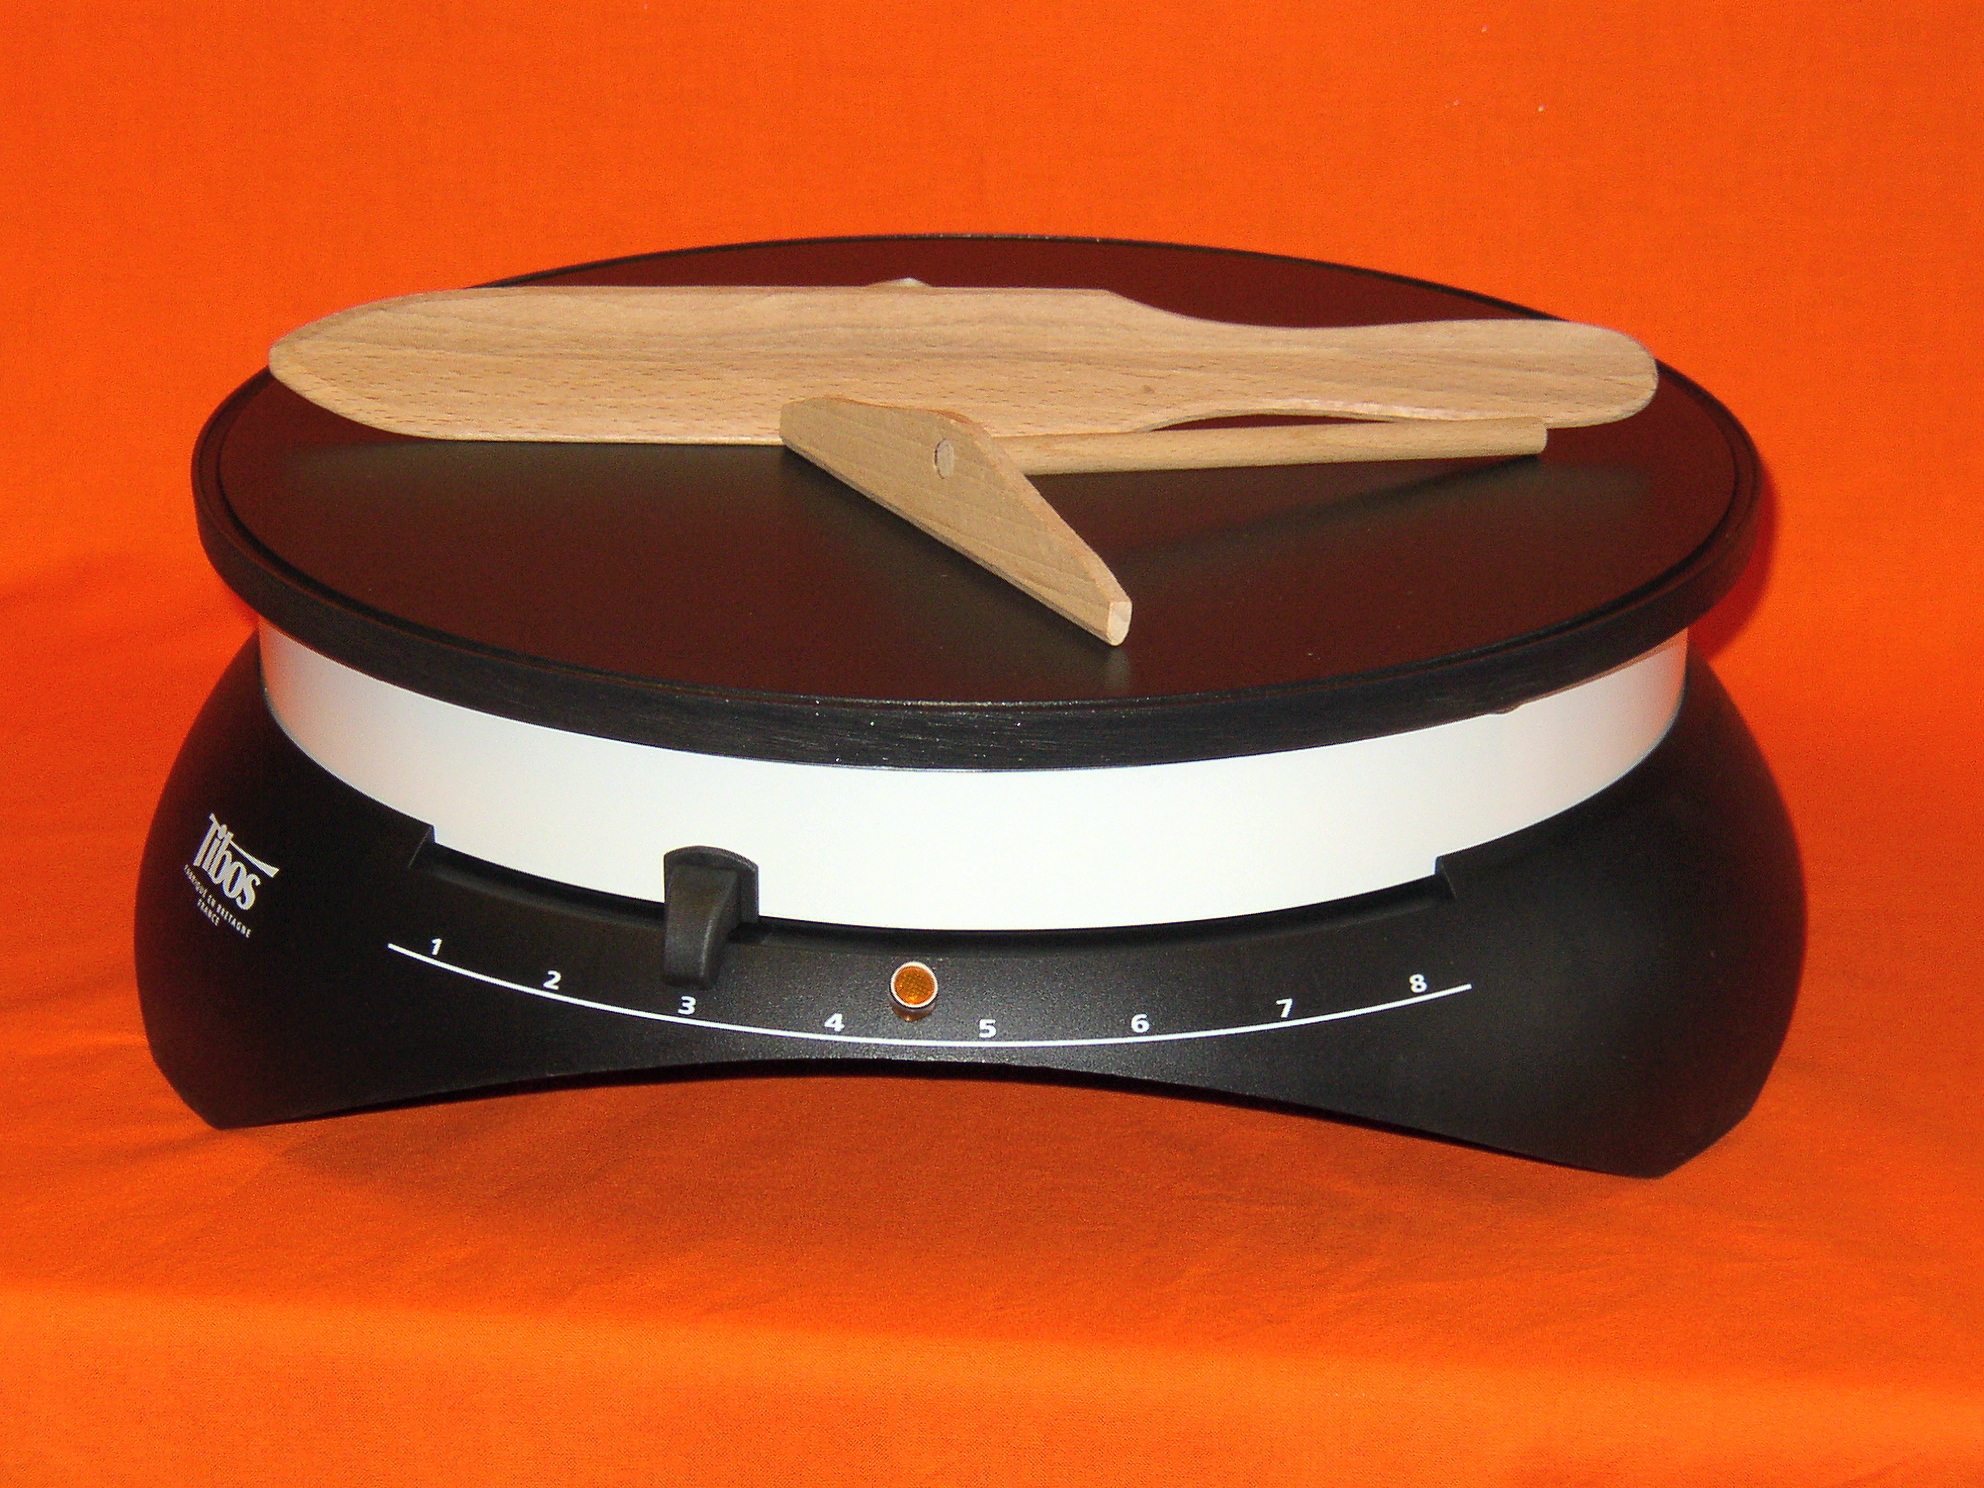 French electric crêpe maker to make crêpes and flatbreads from around the world.